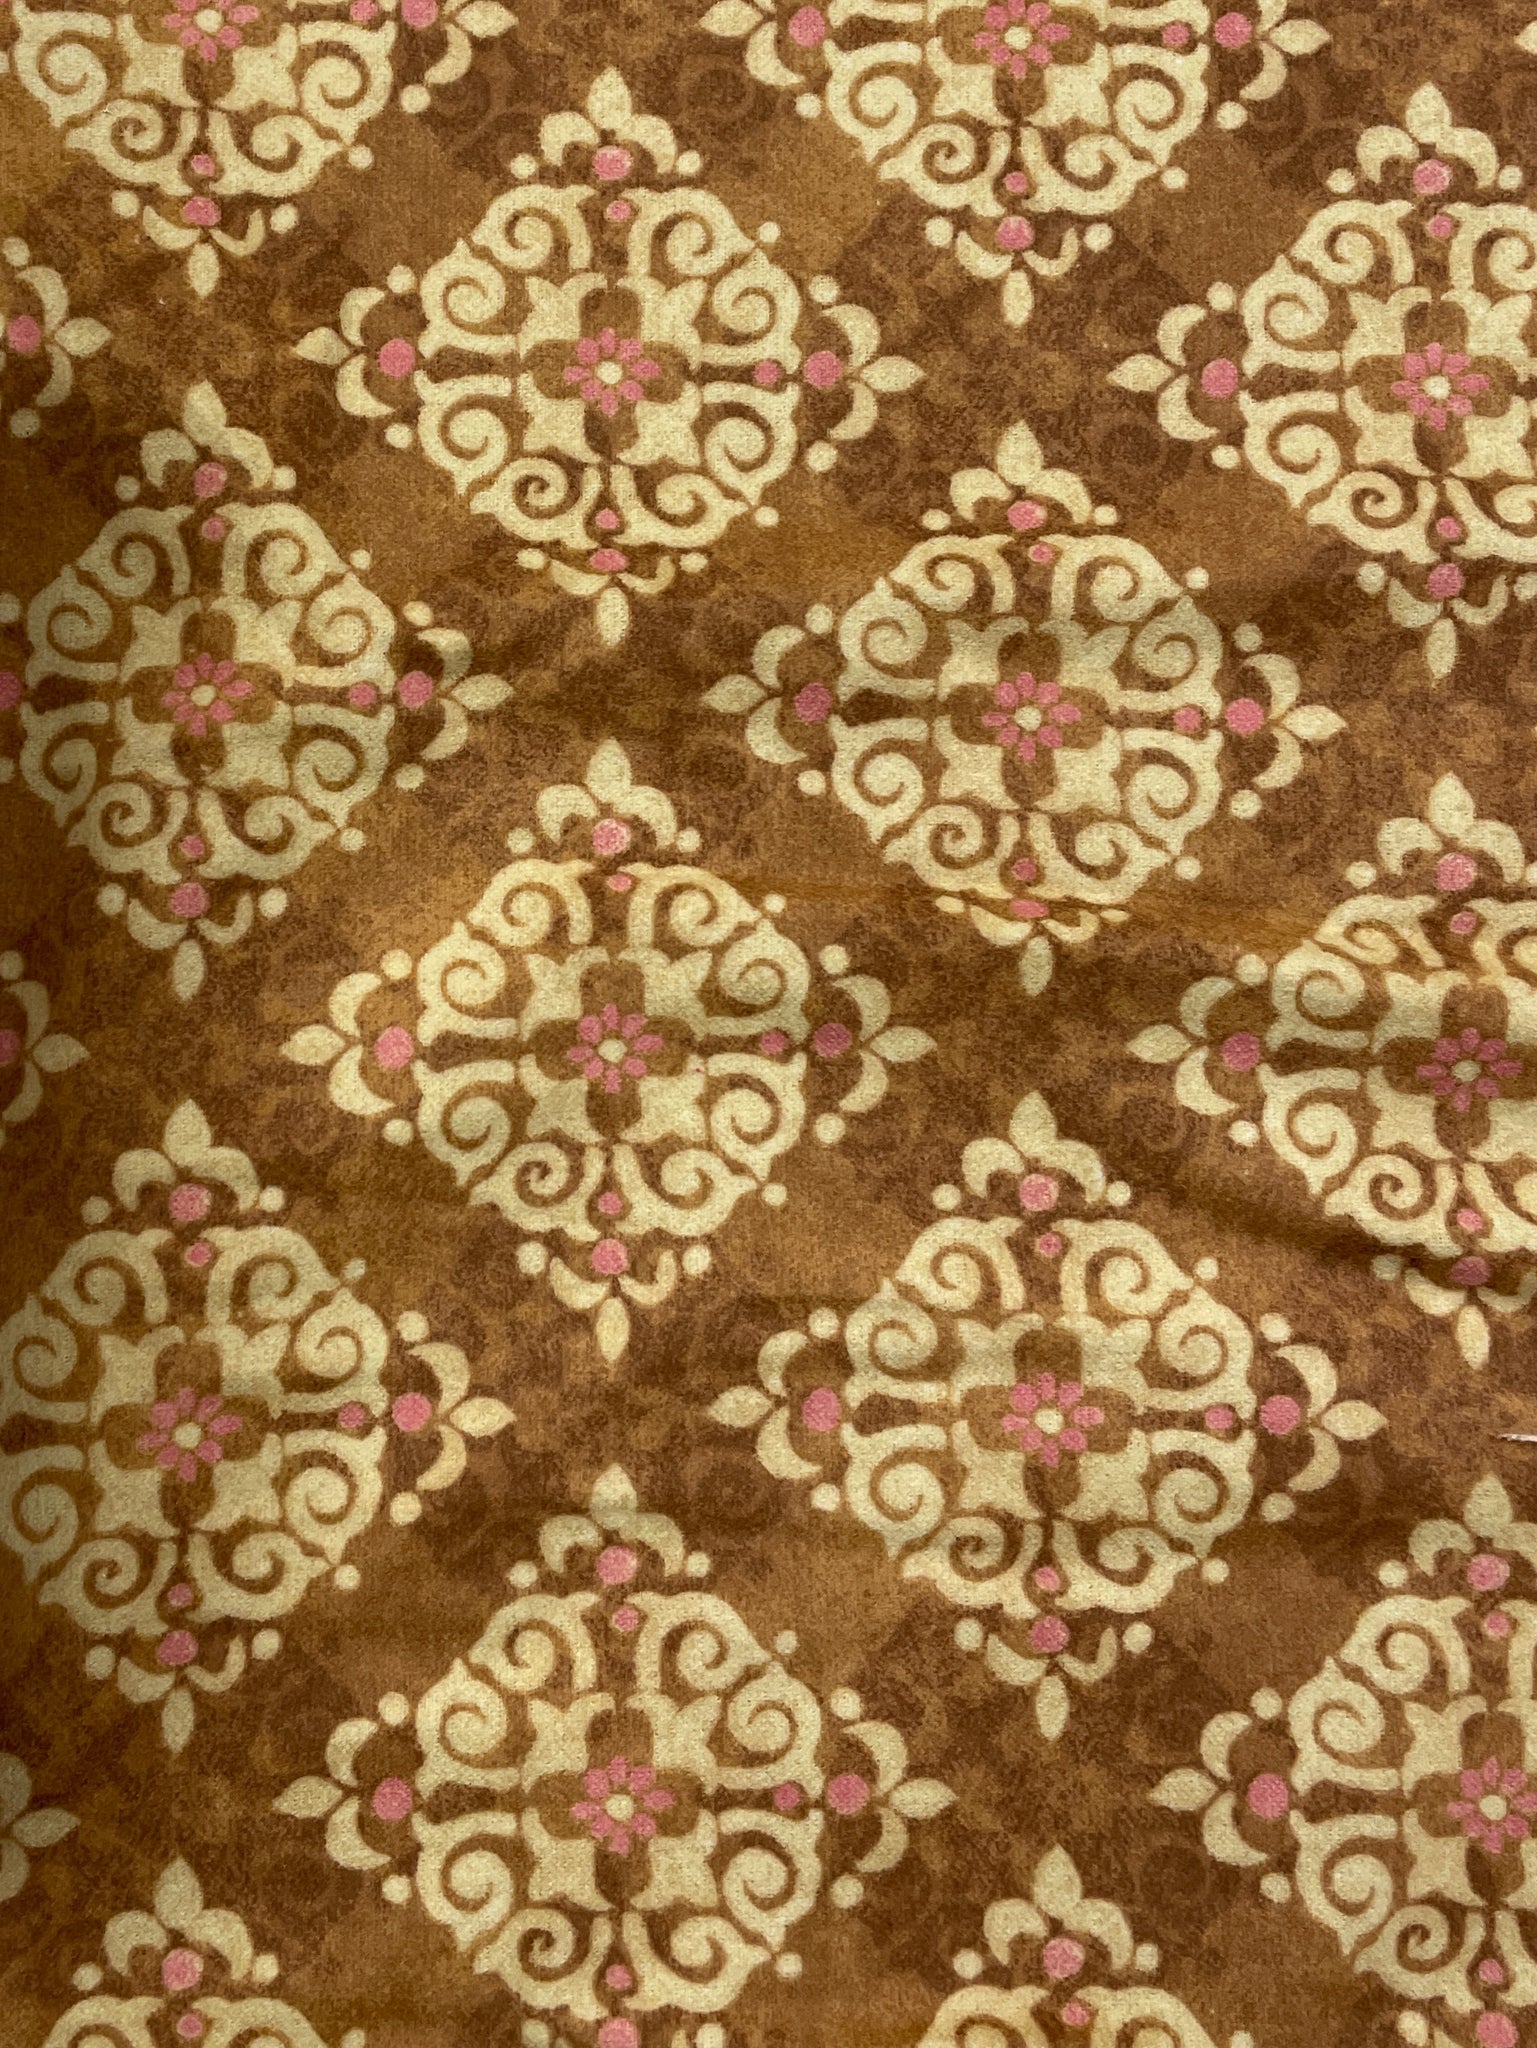 Cotton Flannel - Mottled Tan with Beige and Pink Motifs